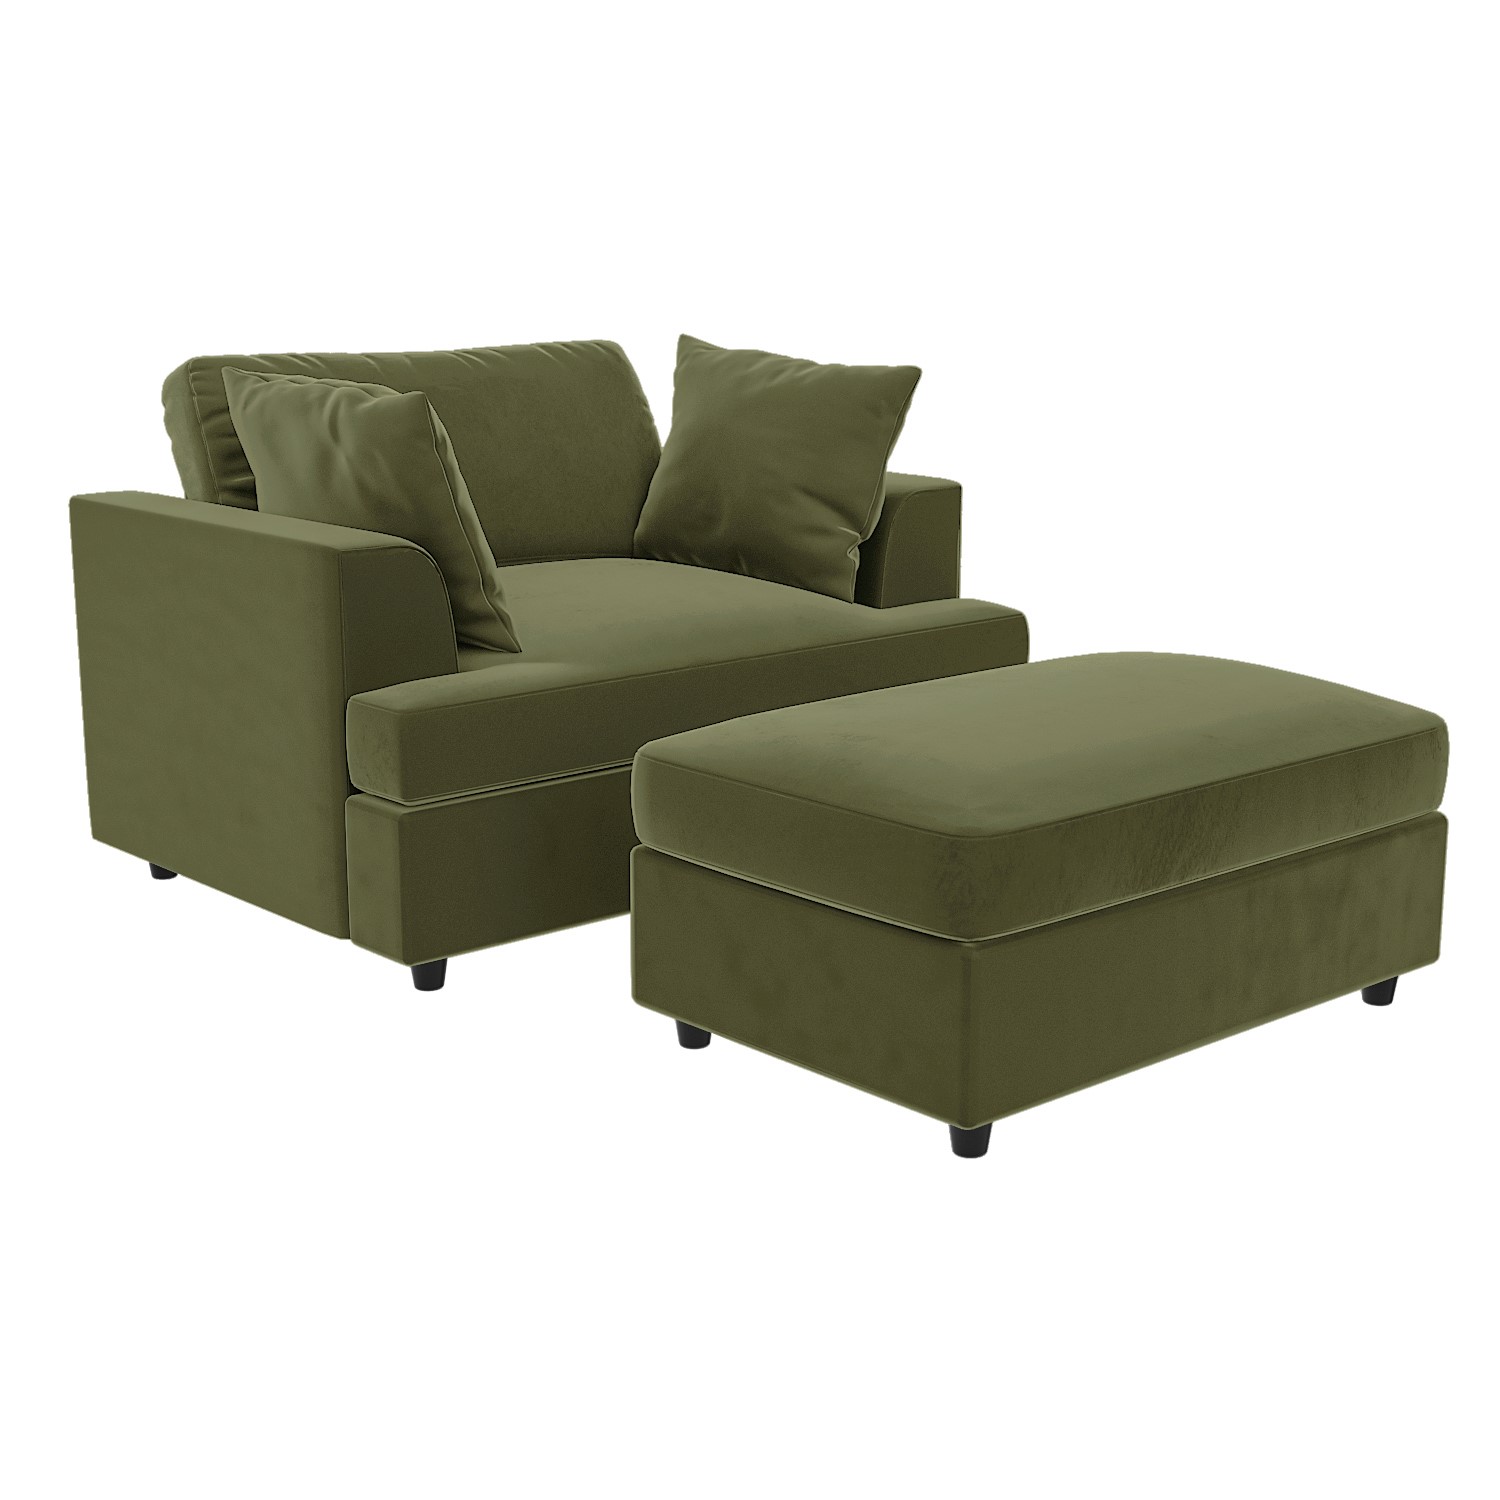 Read more about Olive green velvet loveseat and footstool set august